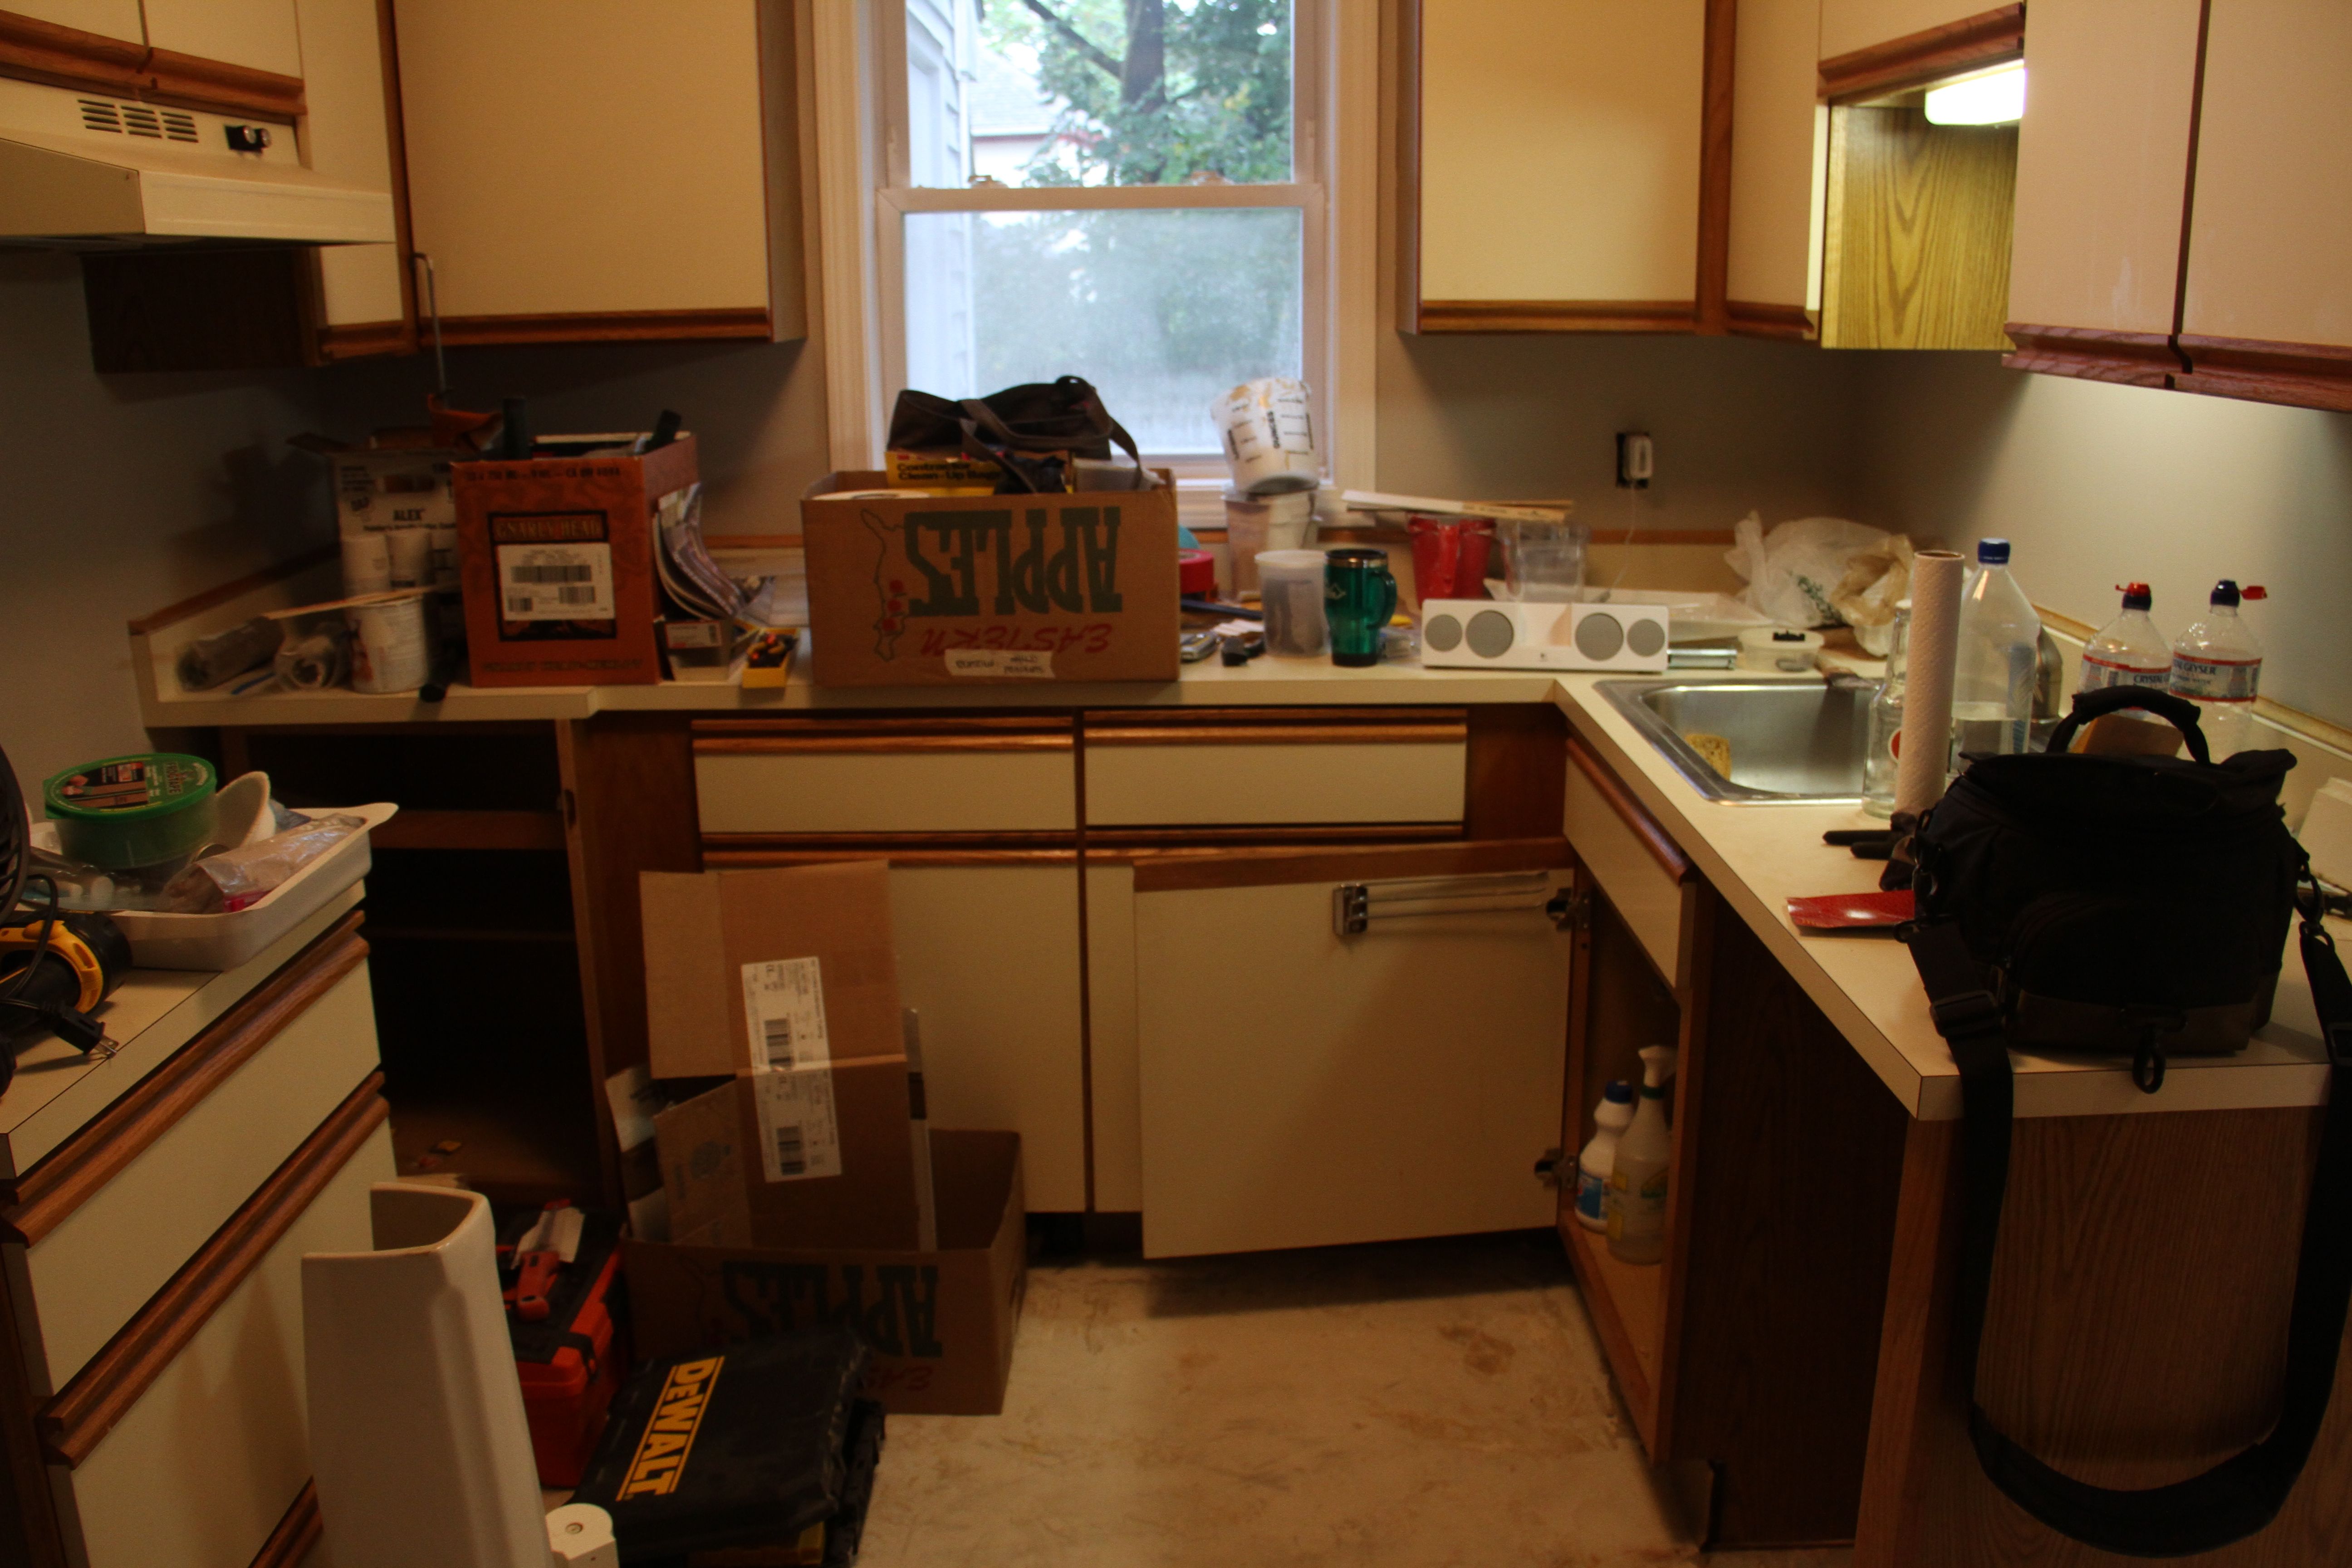 The state of the kitchen, with only one undercabinet light source. (Note the total and utter CHAOS that is everywhere!)